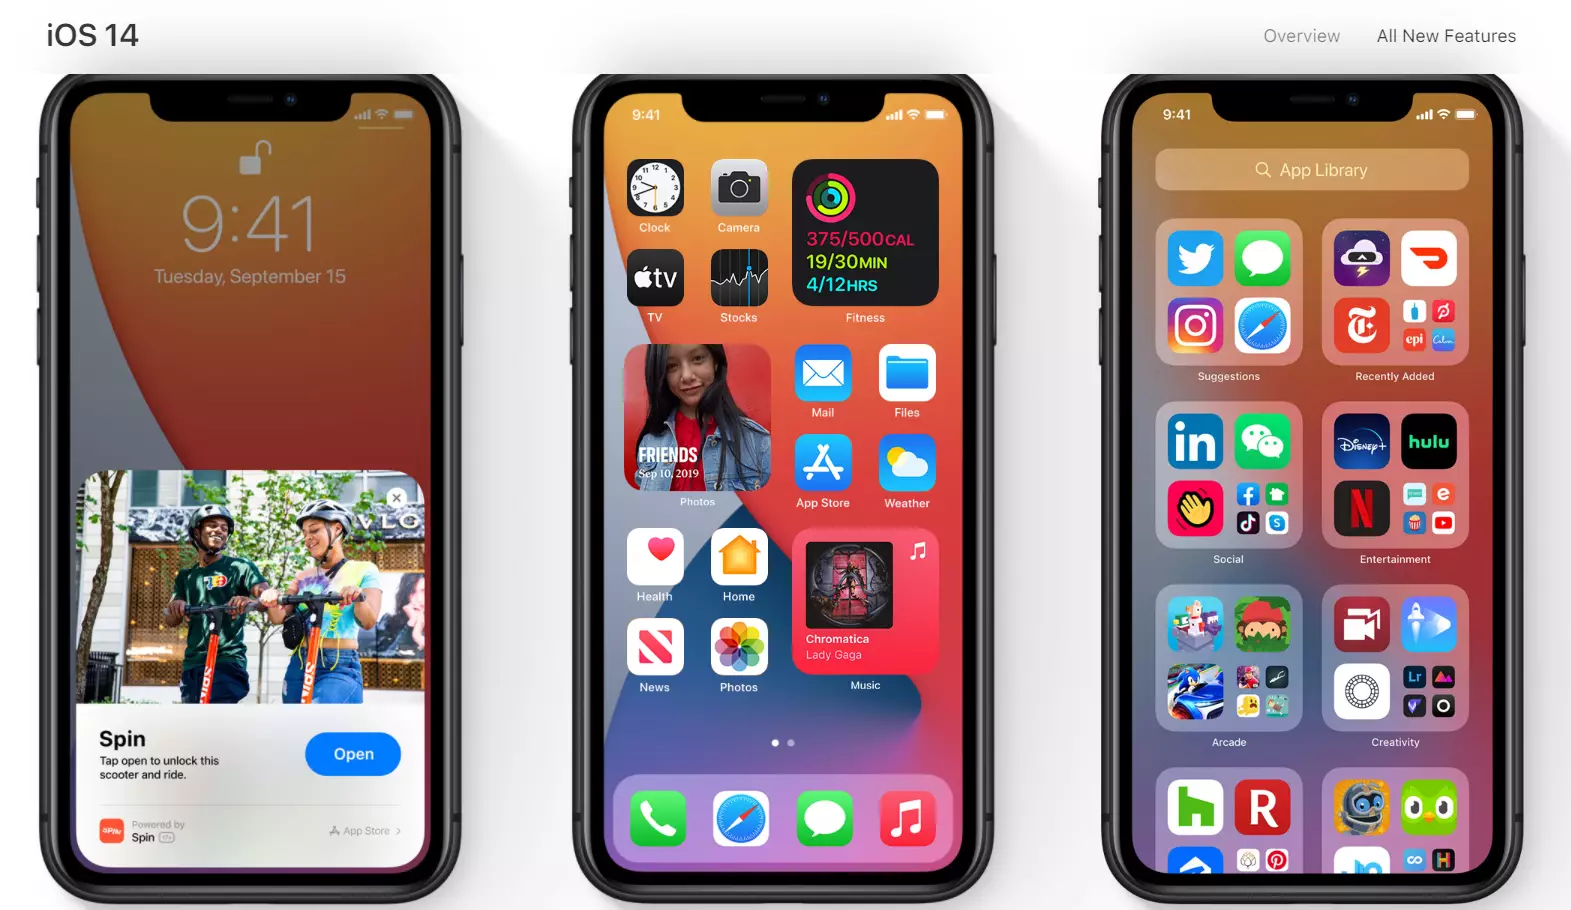 A new iOS 14 update is being released today.